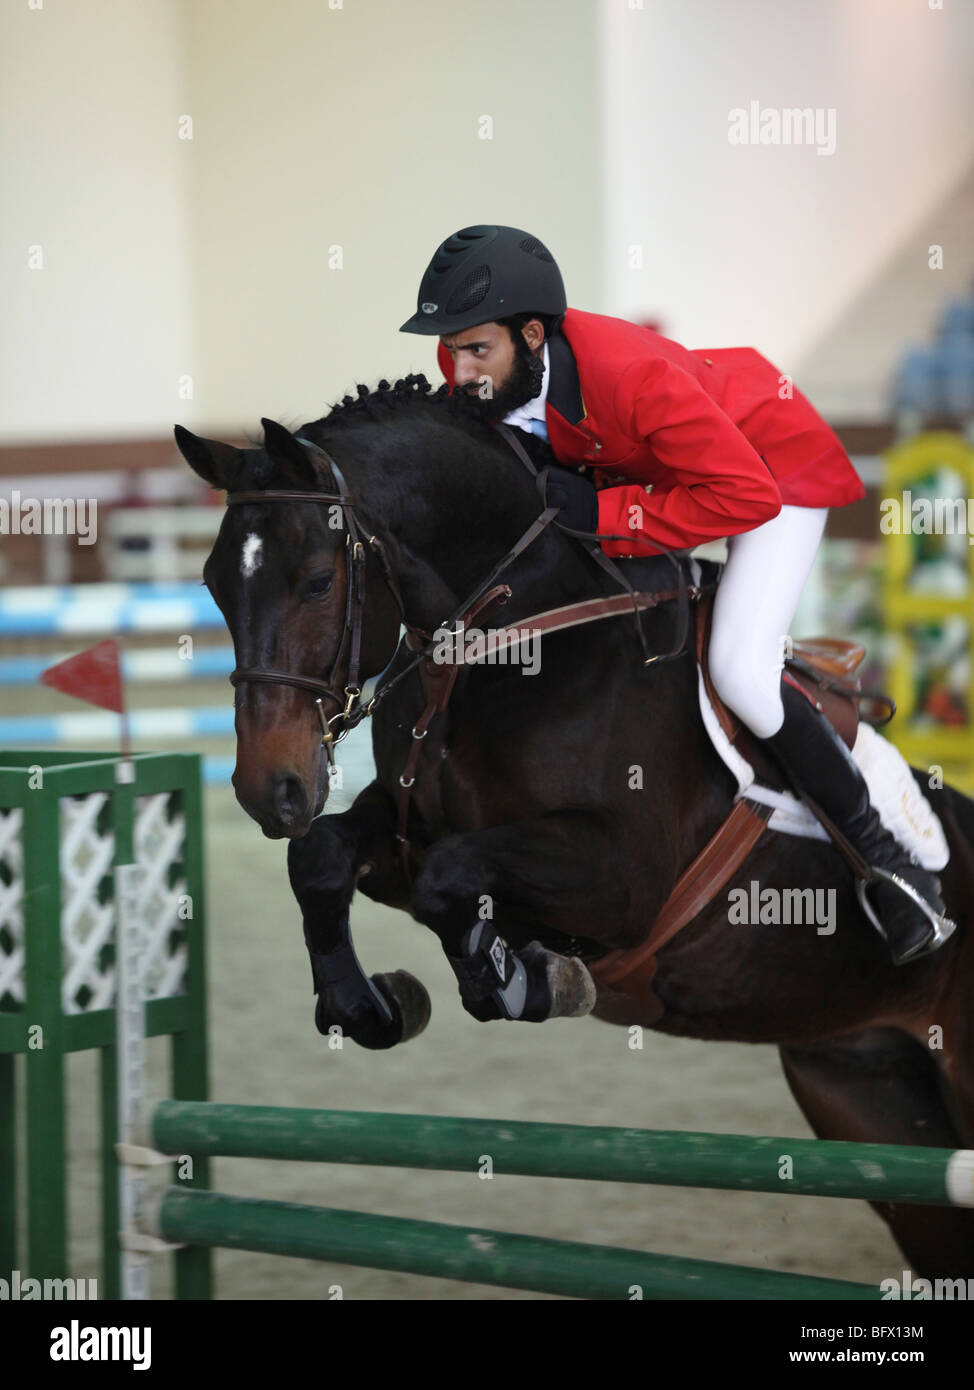 A regional showjumping competition at the Qatar Equestrian Federation's indoor arena in Doha Stock Photo